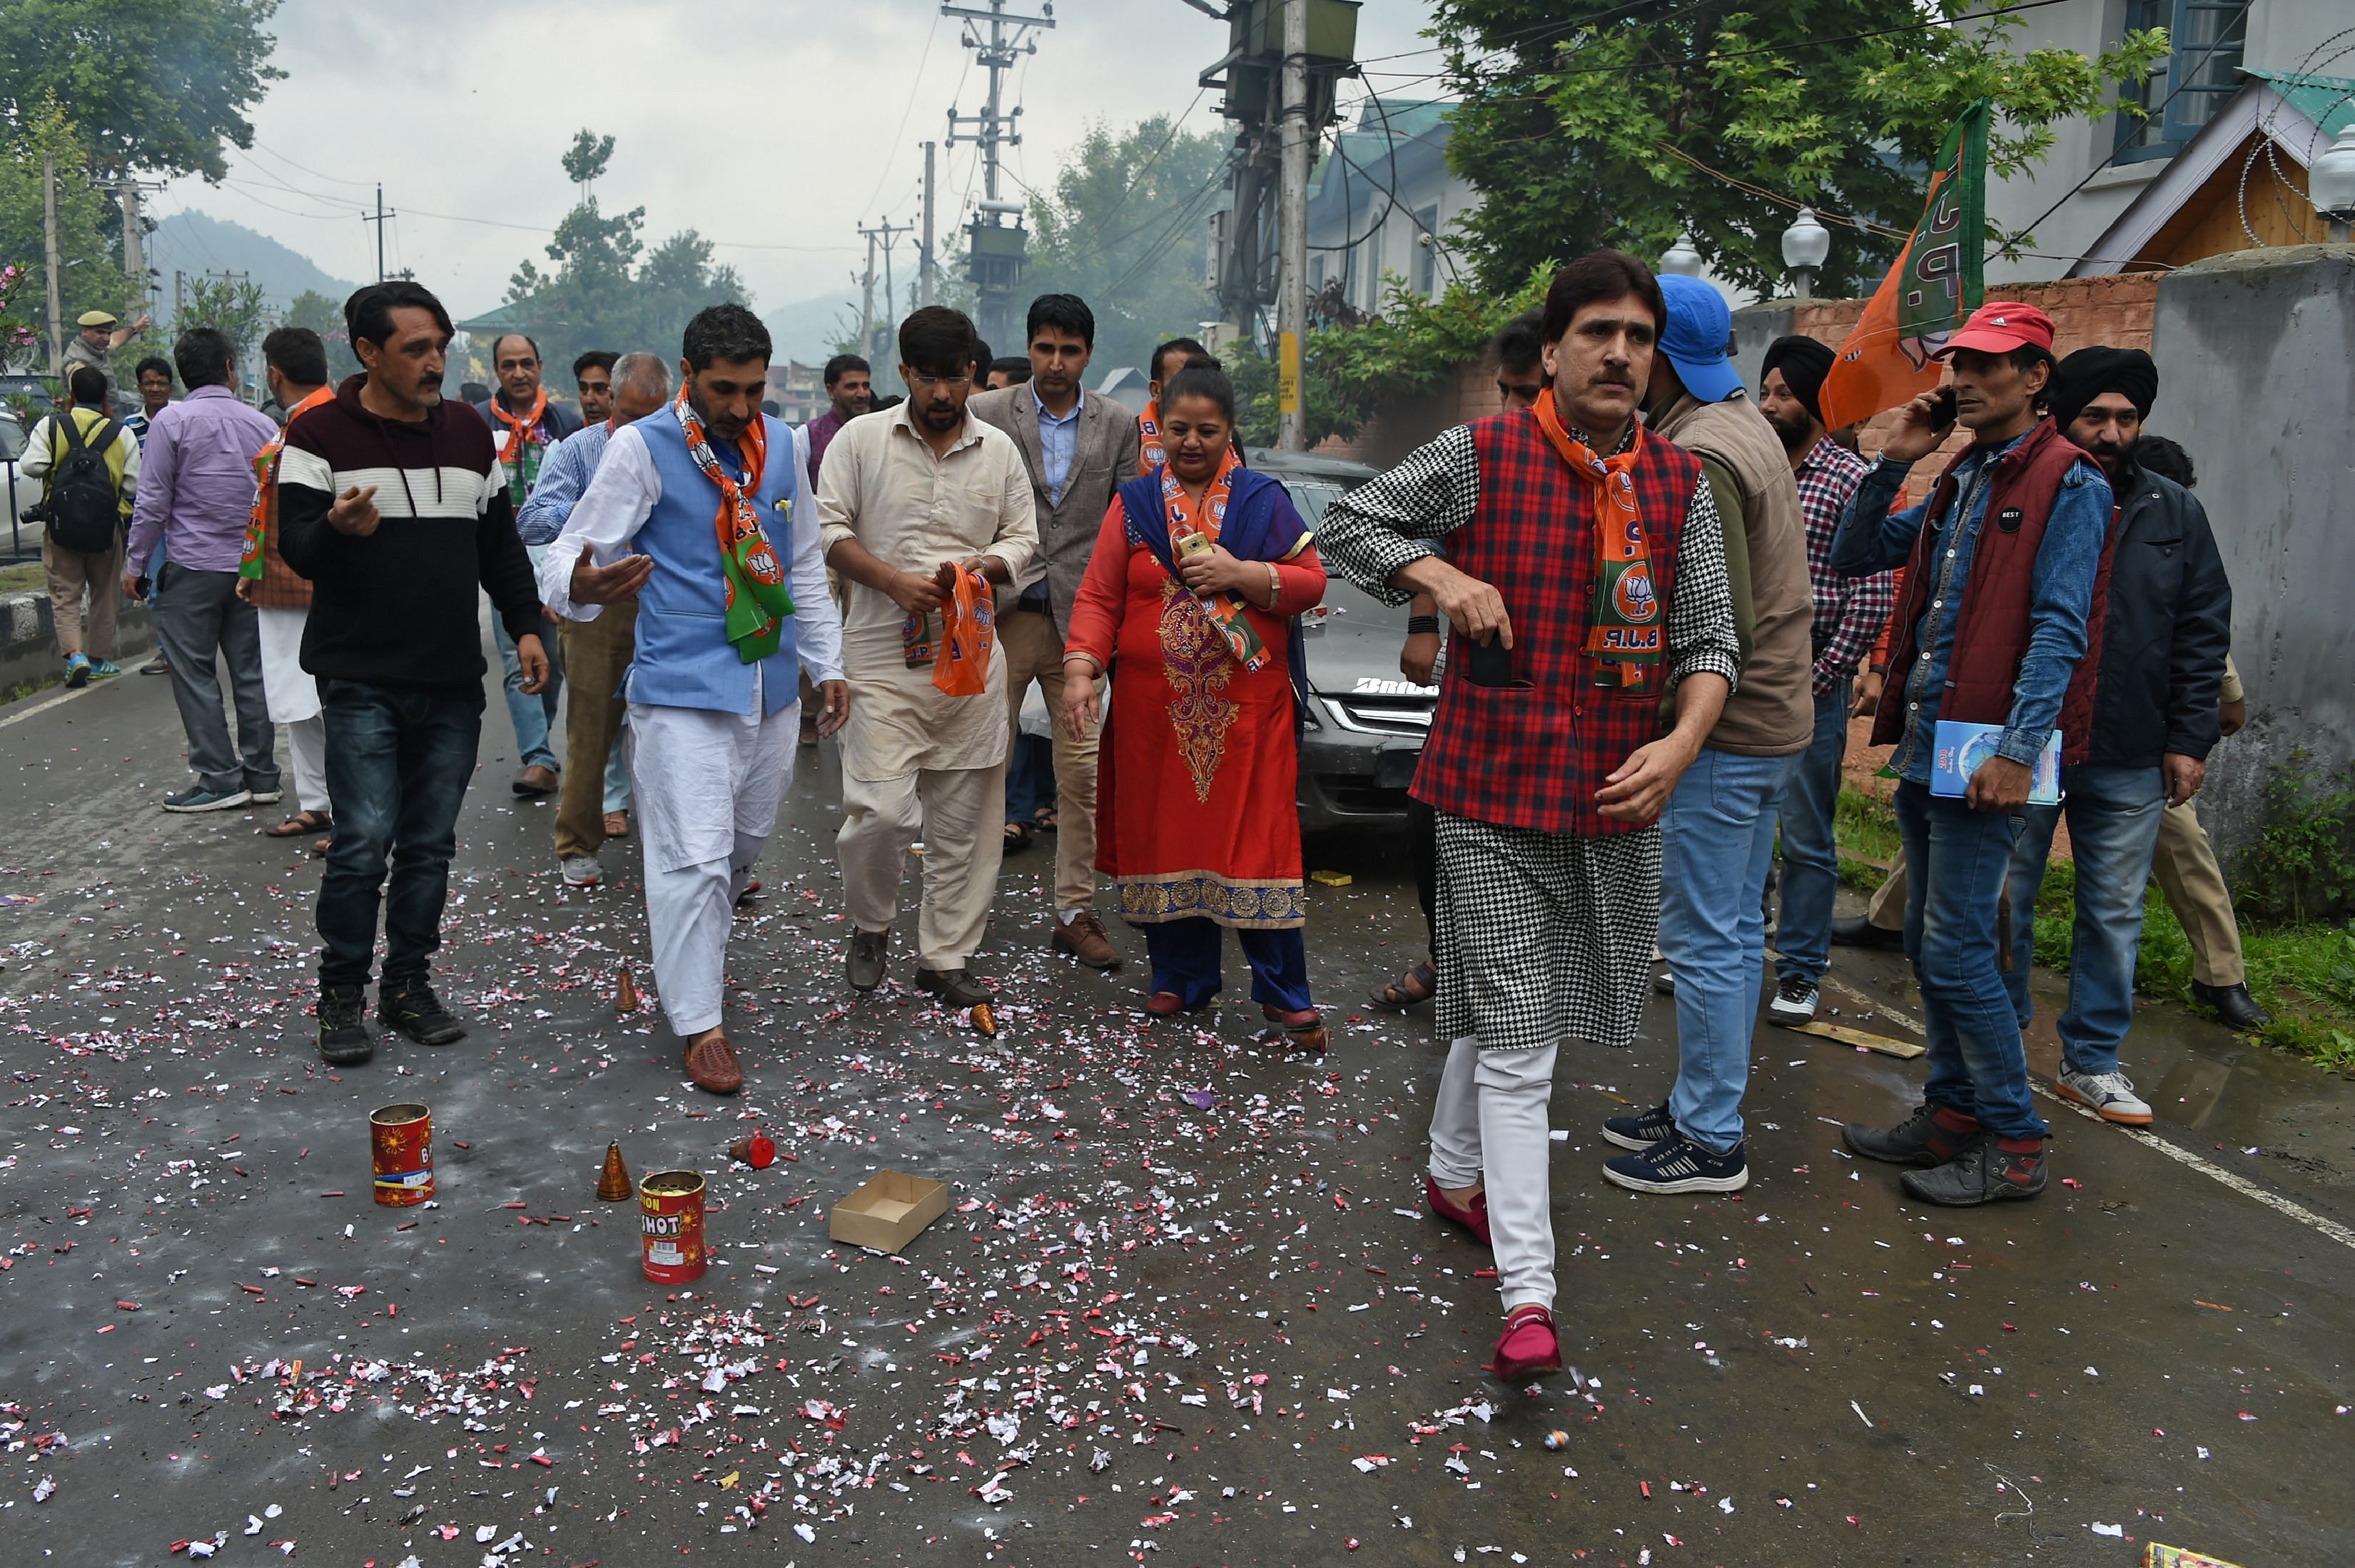 Kashmiri Bhartiya Janata Party (BJP) activists celebrate the poll results of India's general election in Srinagar on May 23, 2019. - India's Prime Minister Narendra Modi claimed victory on May 23 in the country's elections, promising an "inclusive" future after his Hindu nationalist party appeared headed for a landslide win. According to Election Commission data based on votes counted so far, Modi's Bharatiya Janata Party (BJP) is on course to win around 300 of 543 elected seats in India's lower house, surpassing its 2014 victory and crushing the opposition Congress party's hopes of a comeback. (Photo by TAUSEEF MUSTAFA / AFP)